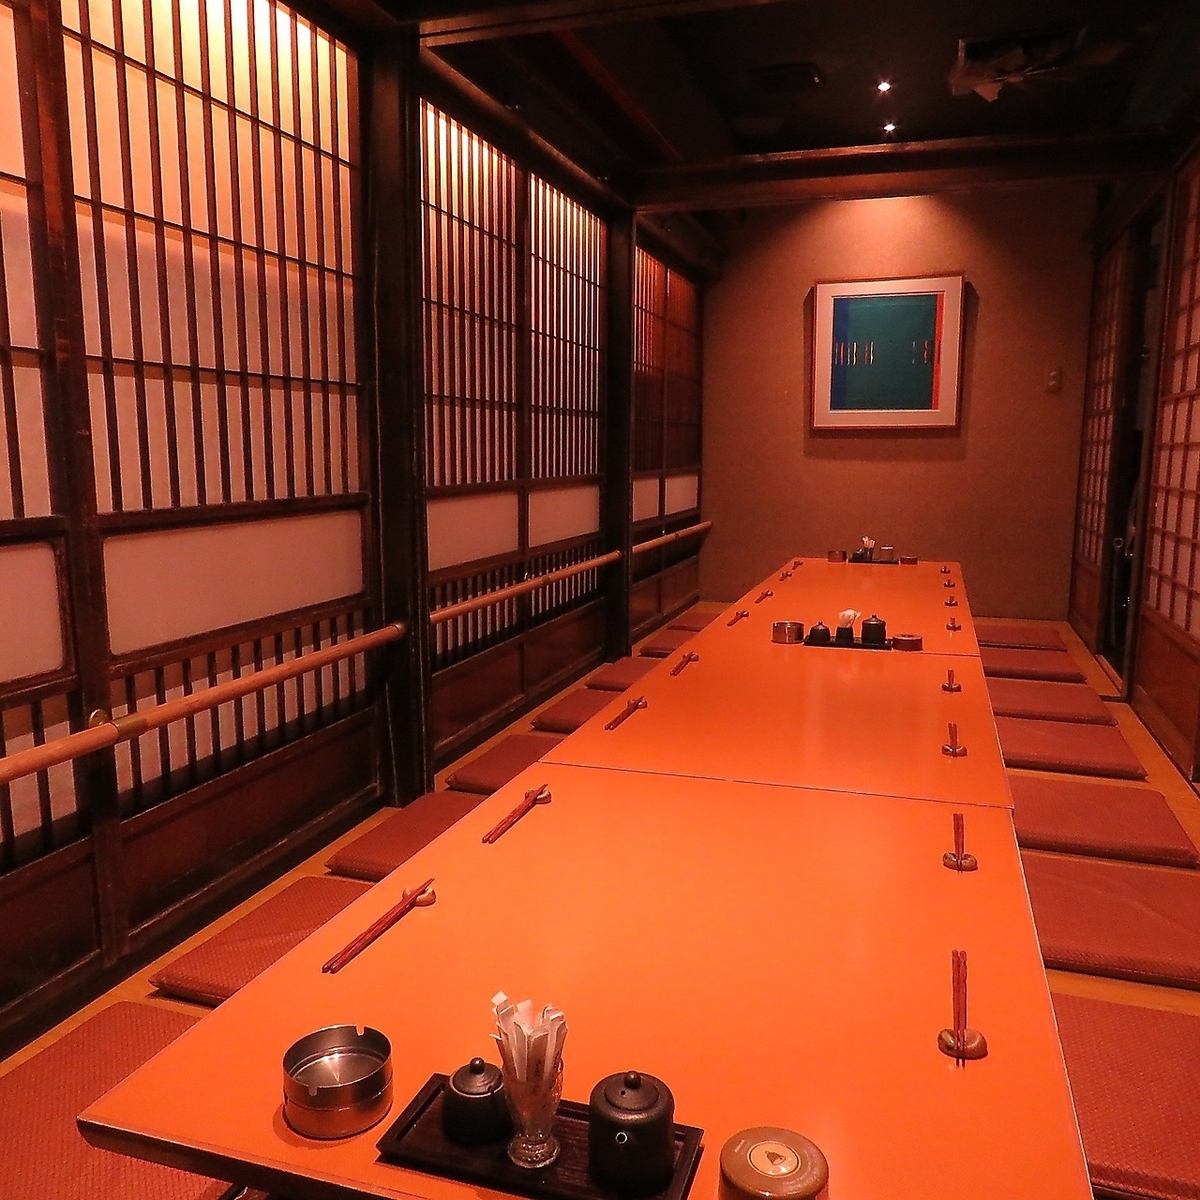 A completely private izakaya at the entrance to Kokubuncho♪Fully equipped with private rooms with horigotatsu seats♪